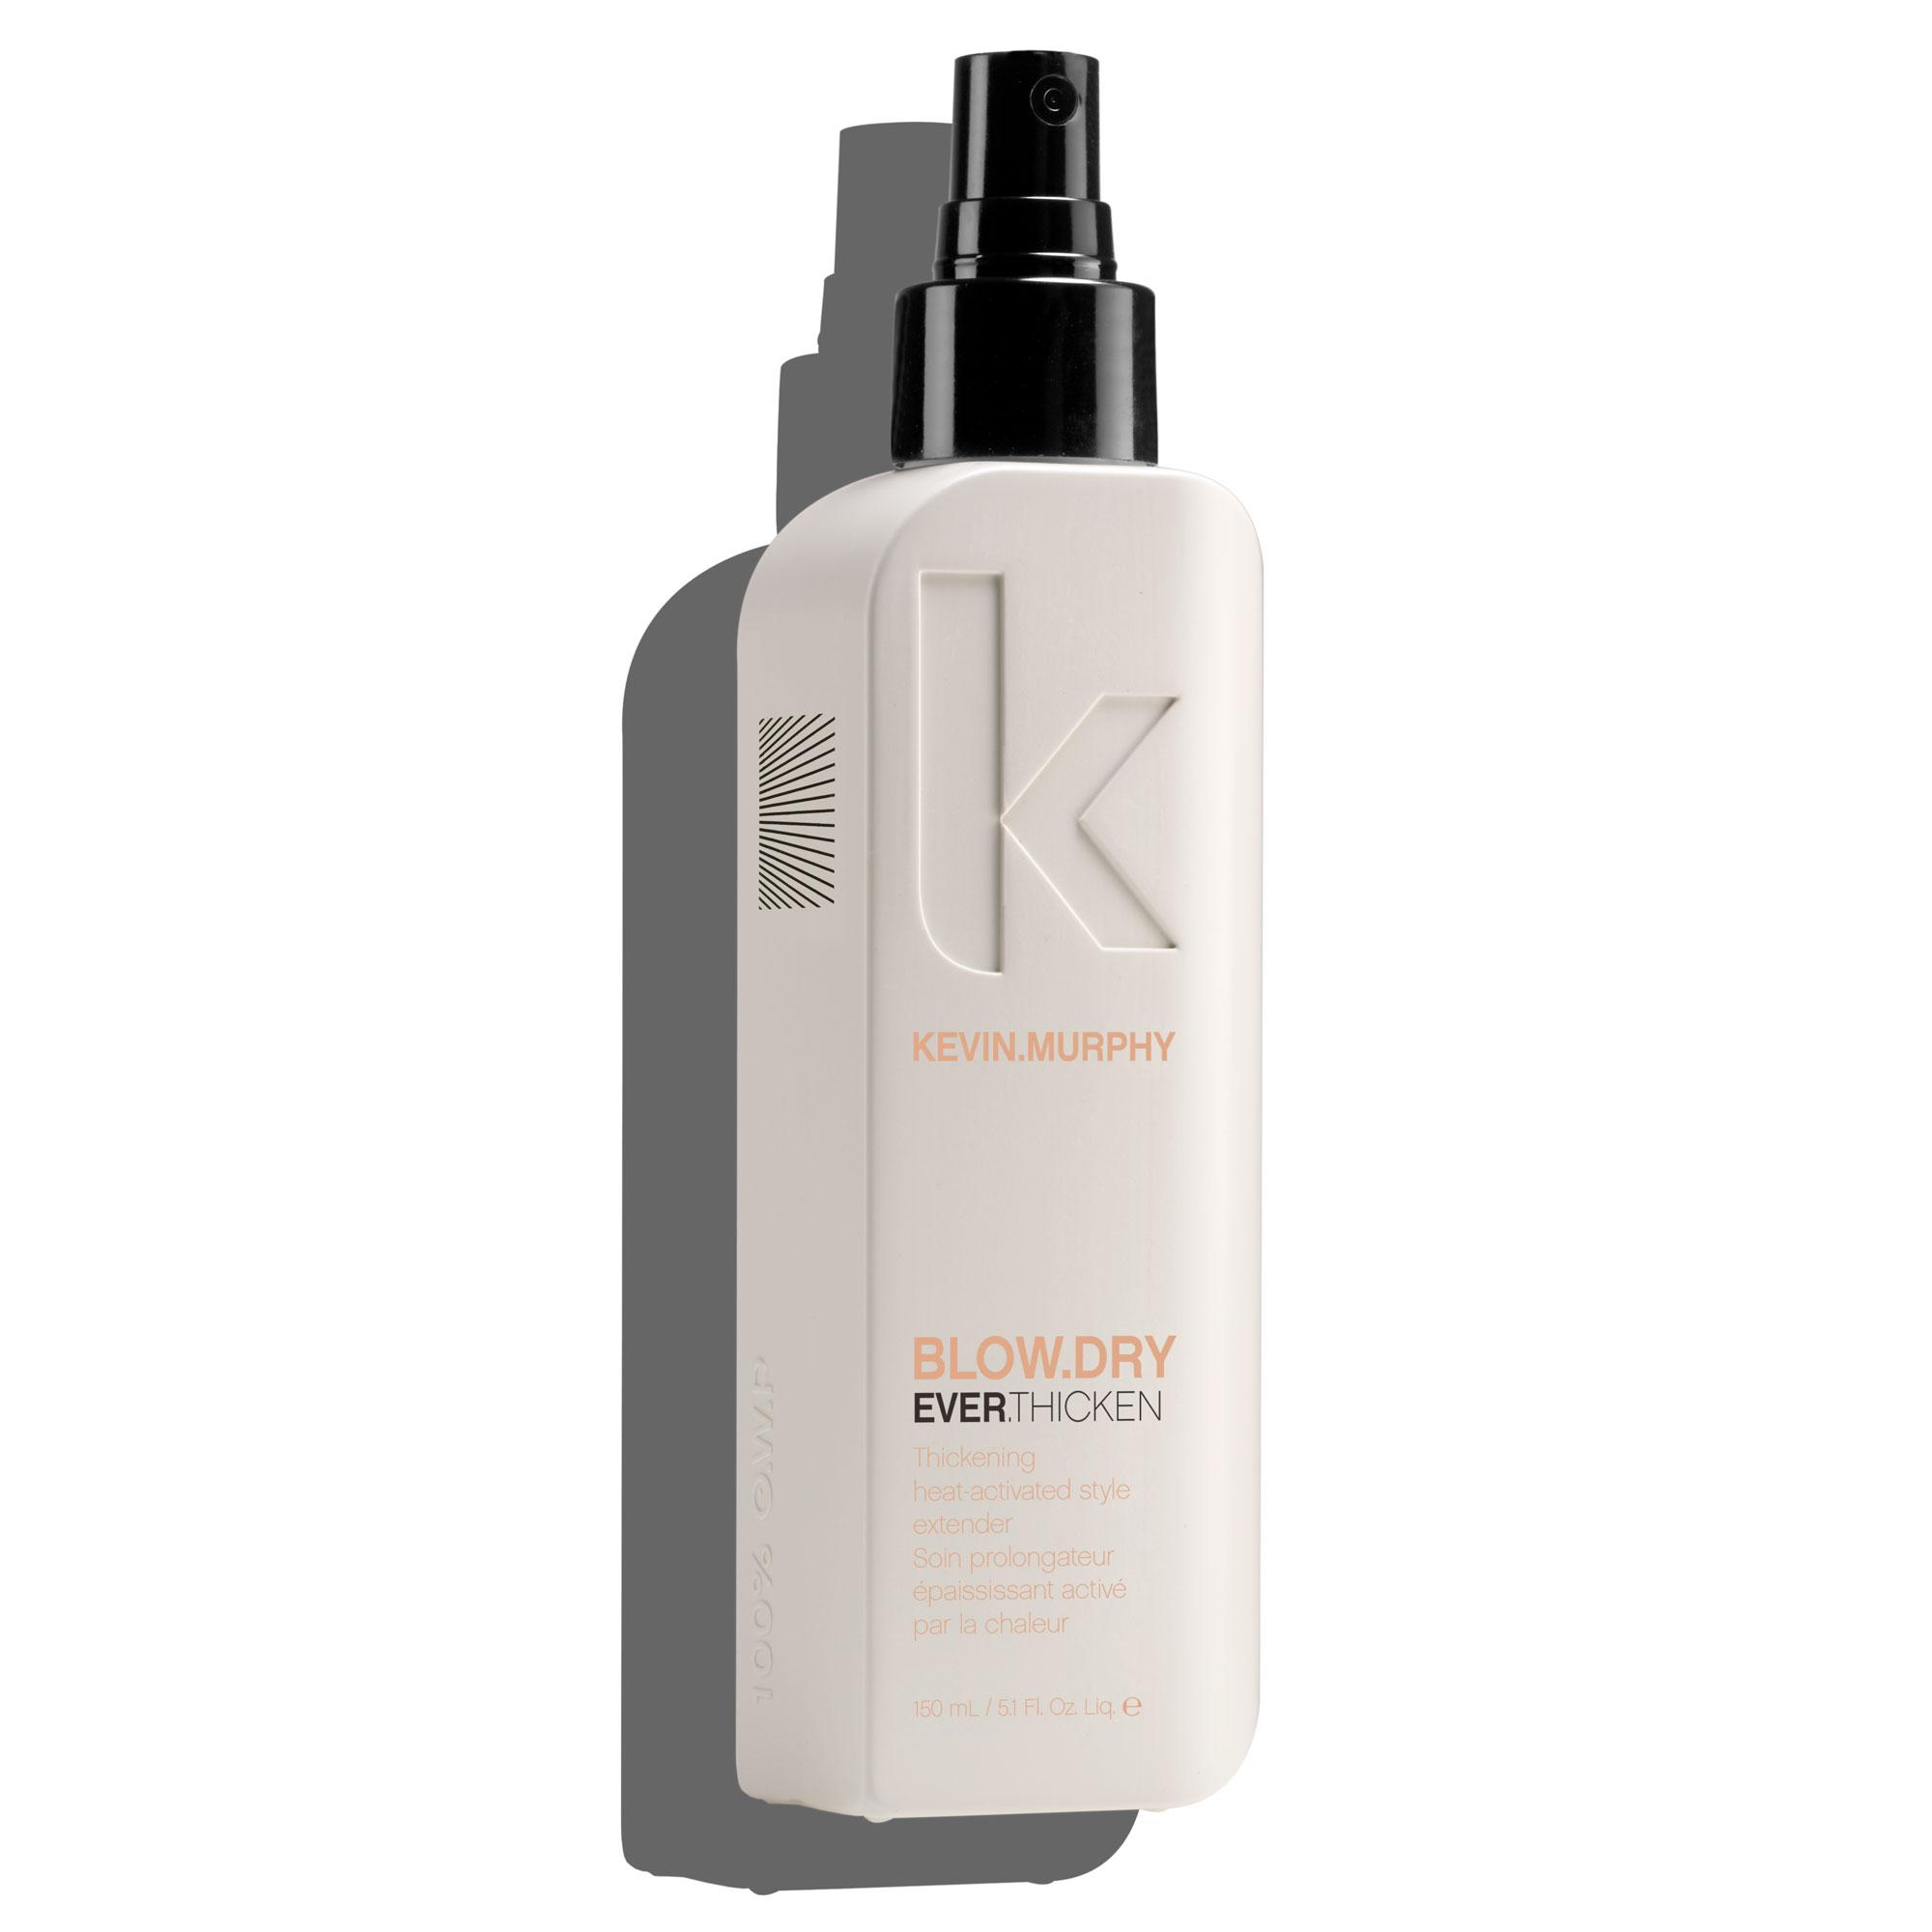 KEVIN.MURPHY BLOW.DRY EVER.THICKEN Spray 5.1oz